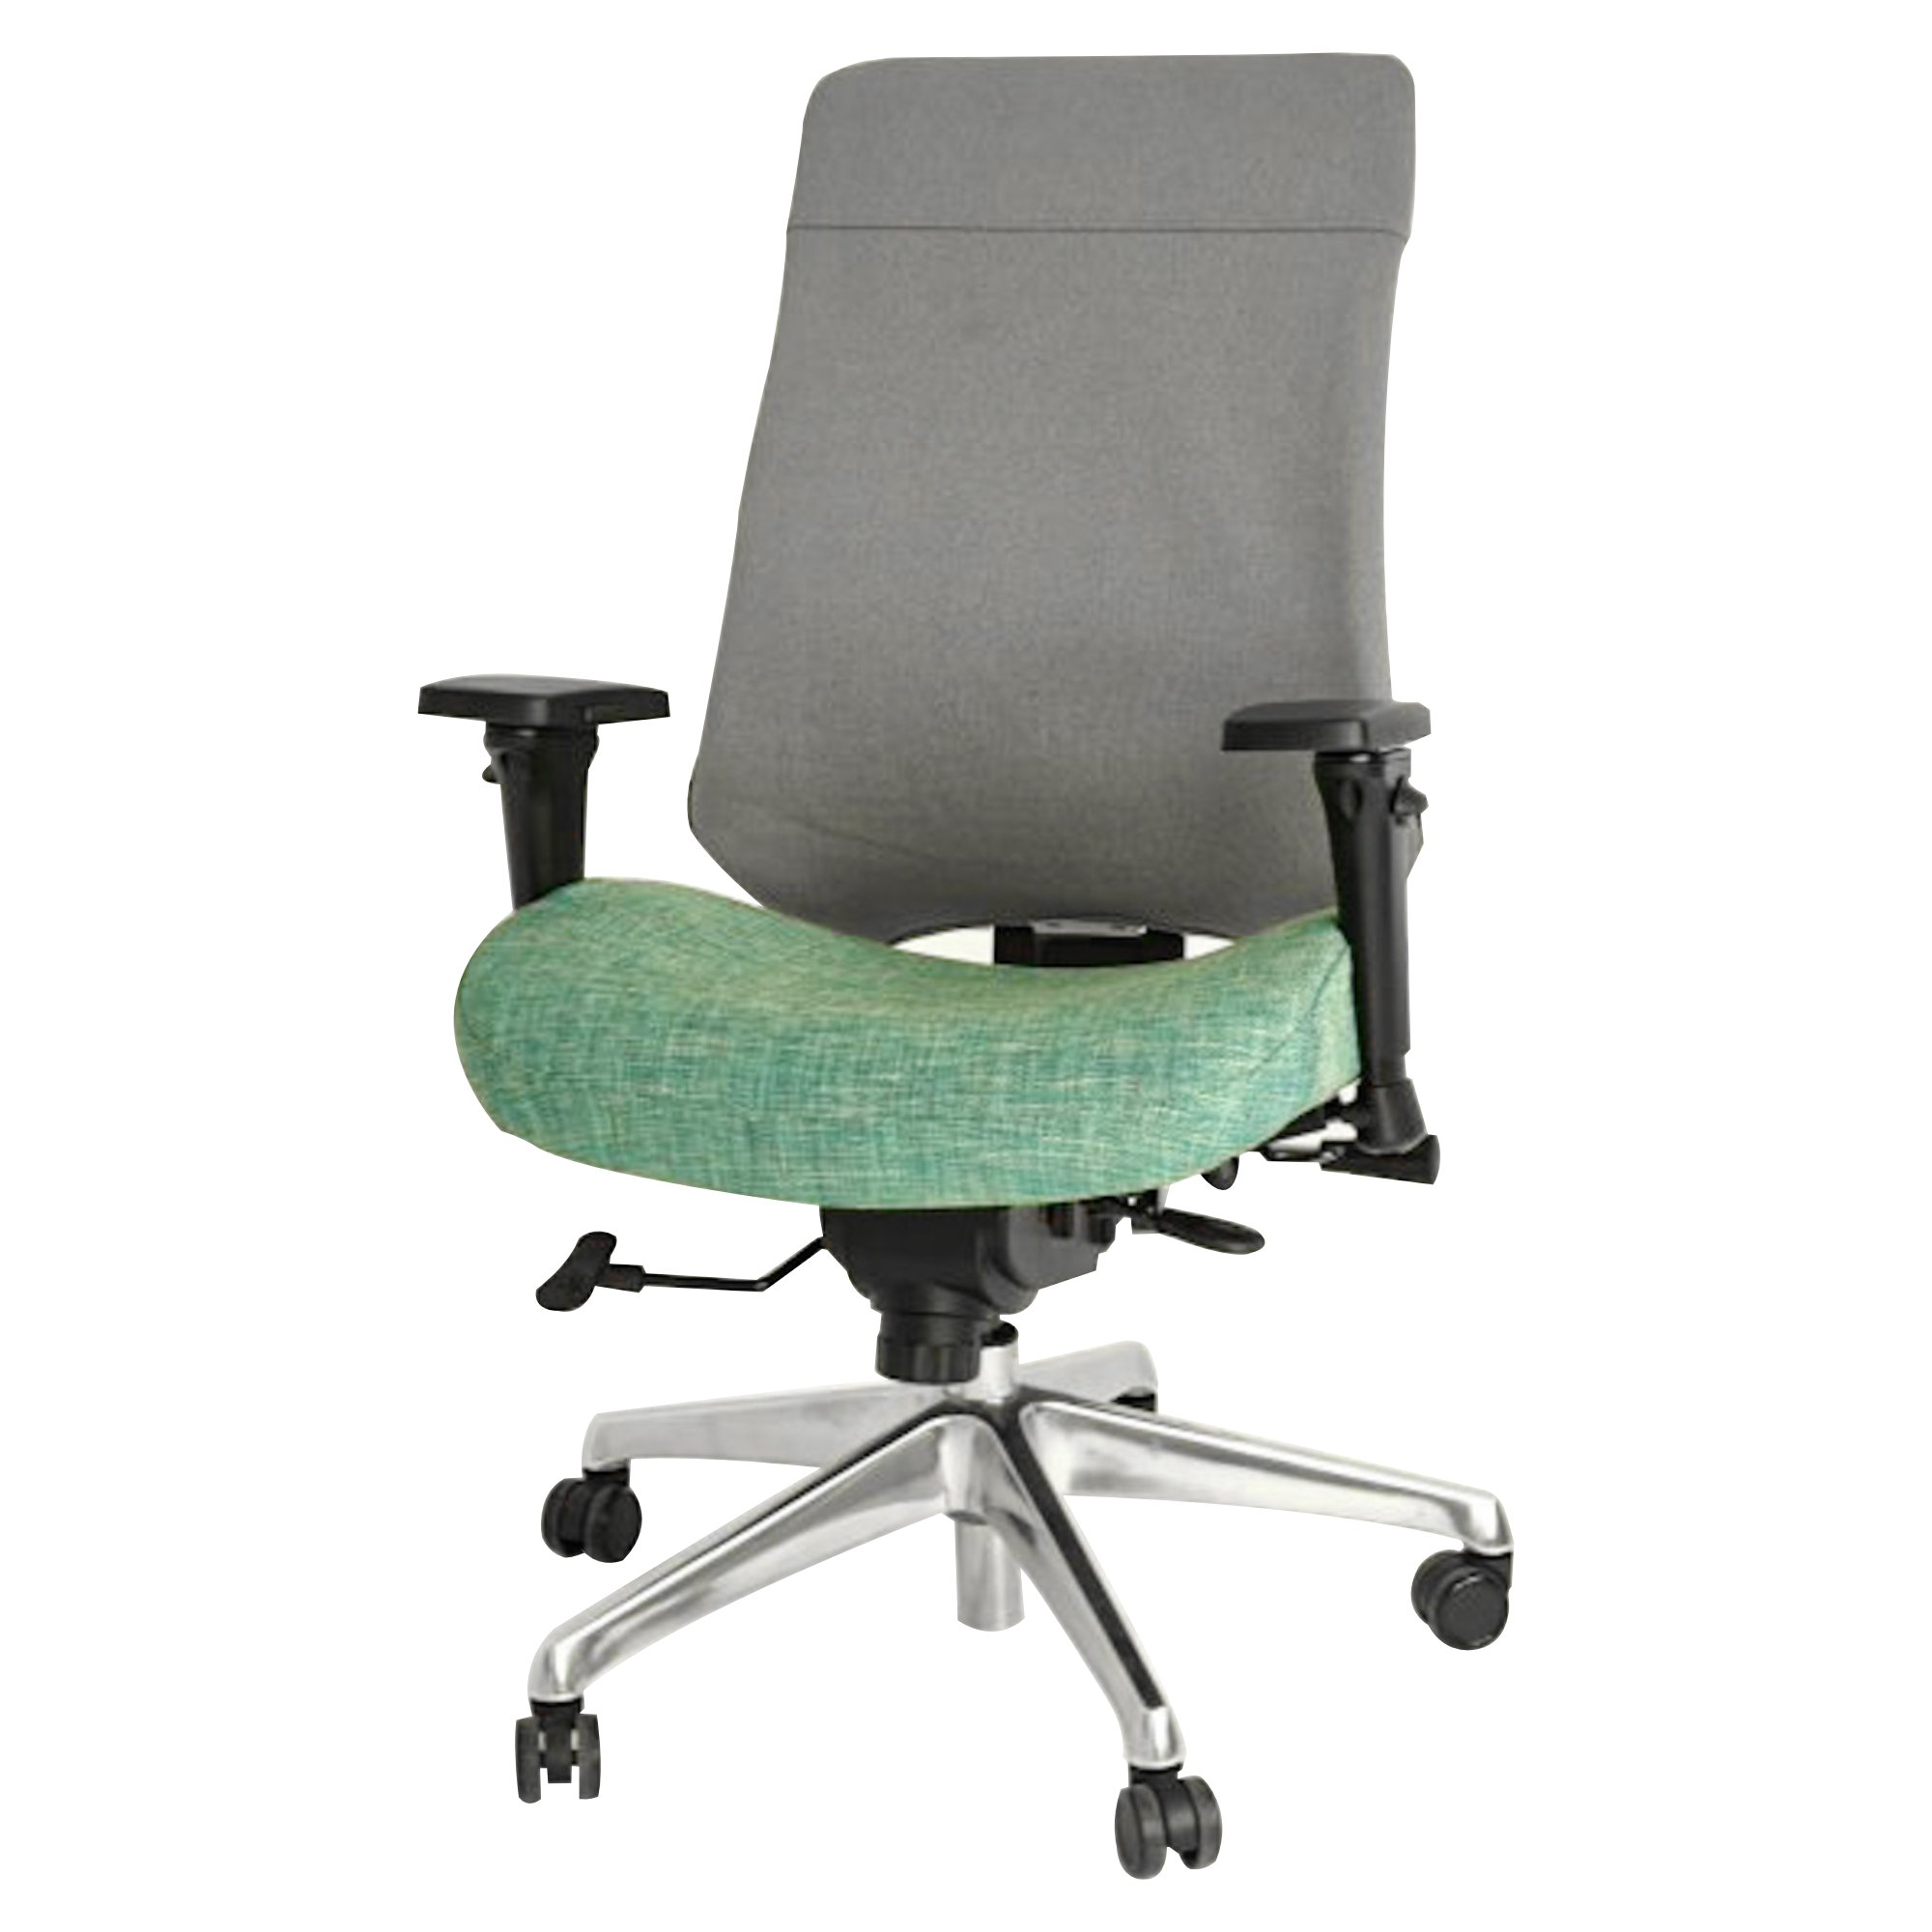  EDC-688 Fully Adjustable Ergonomic Gaming Chair by OM Seating